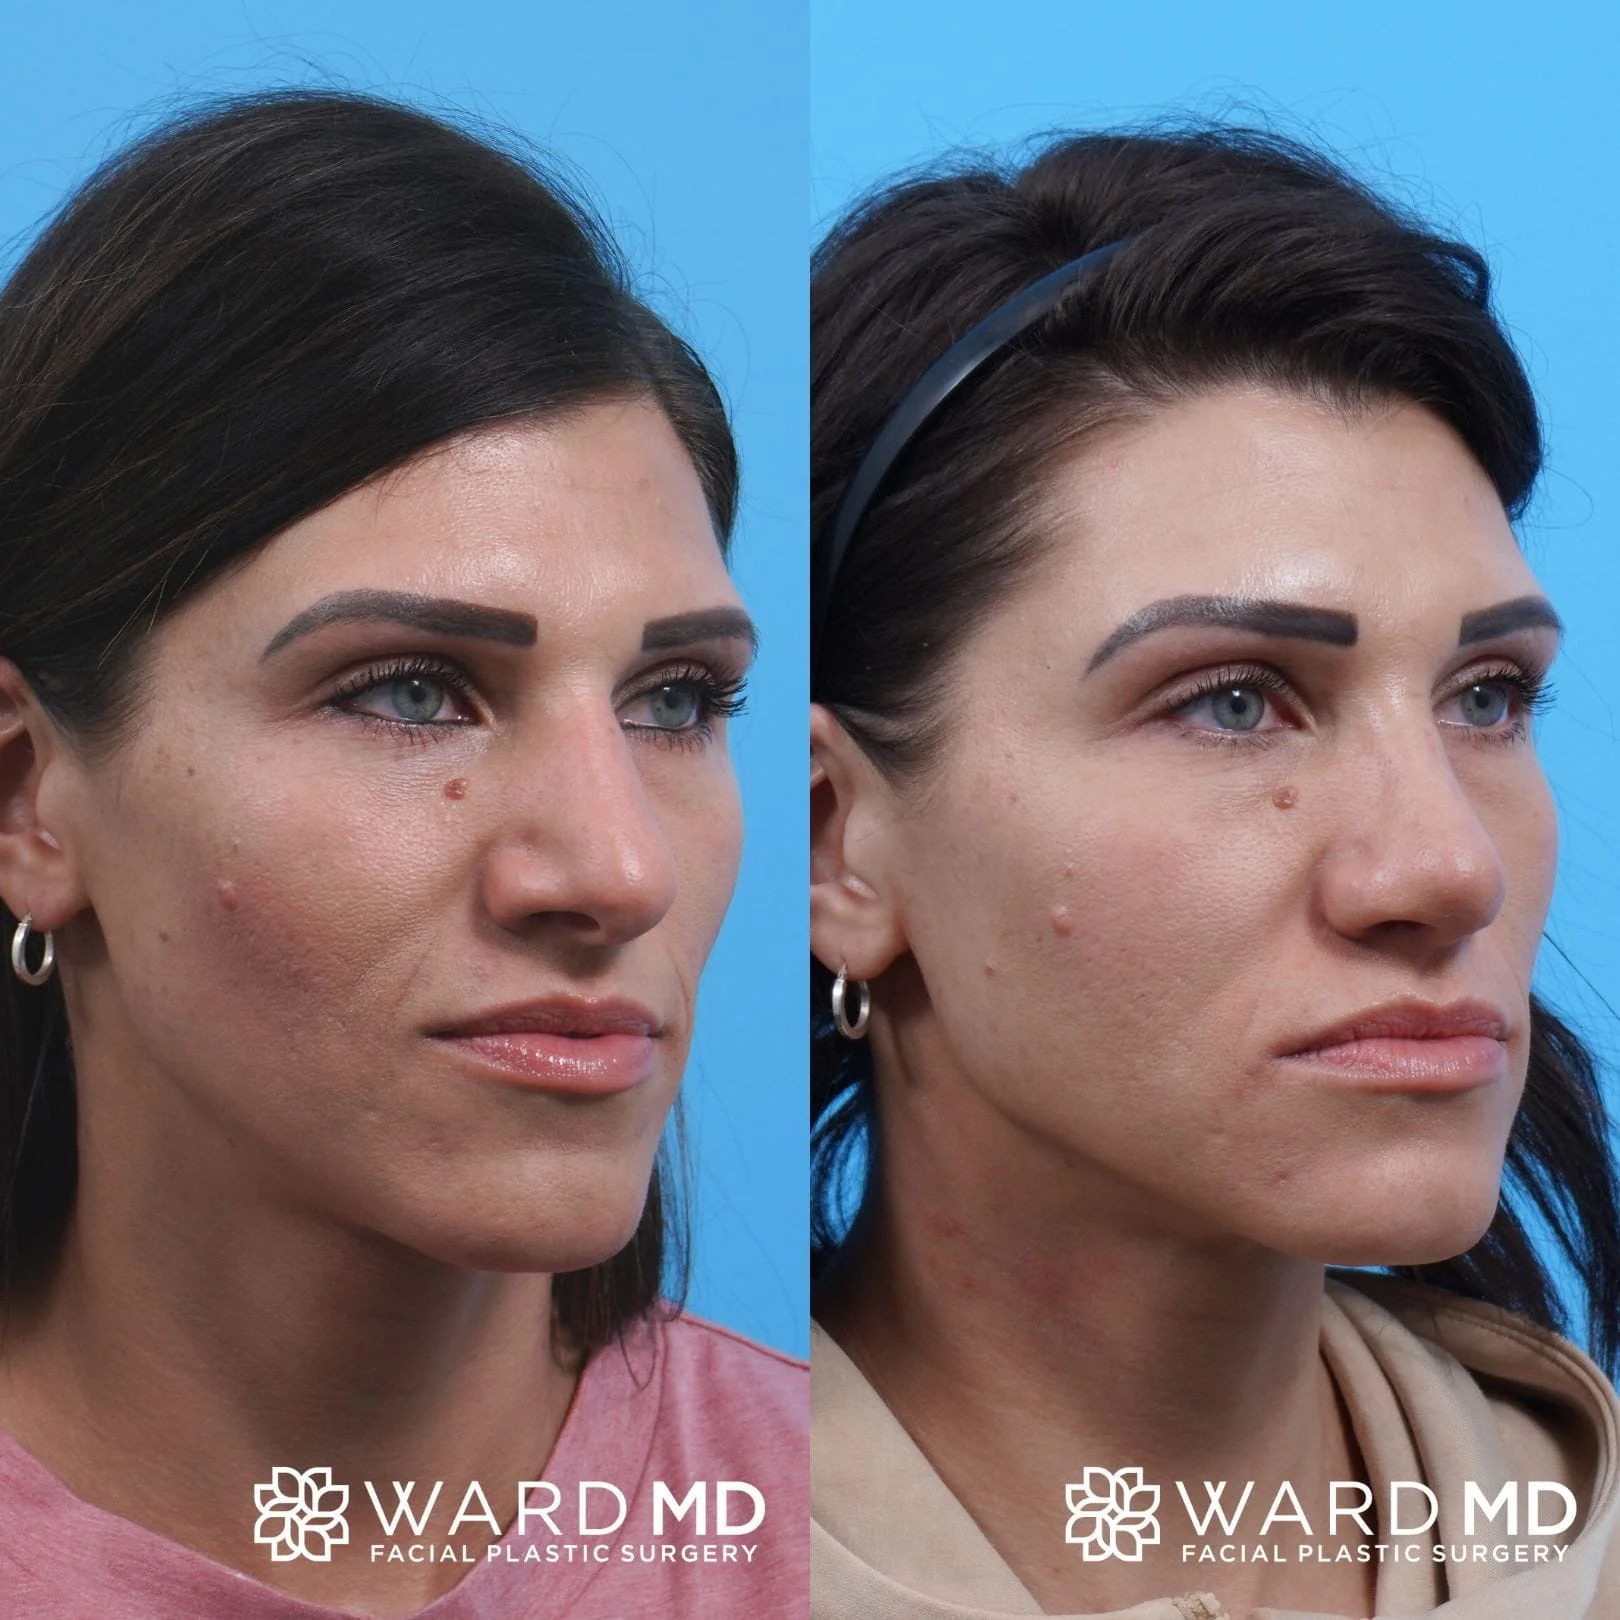 Female rhinoplasty before and after image.